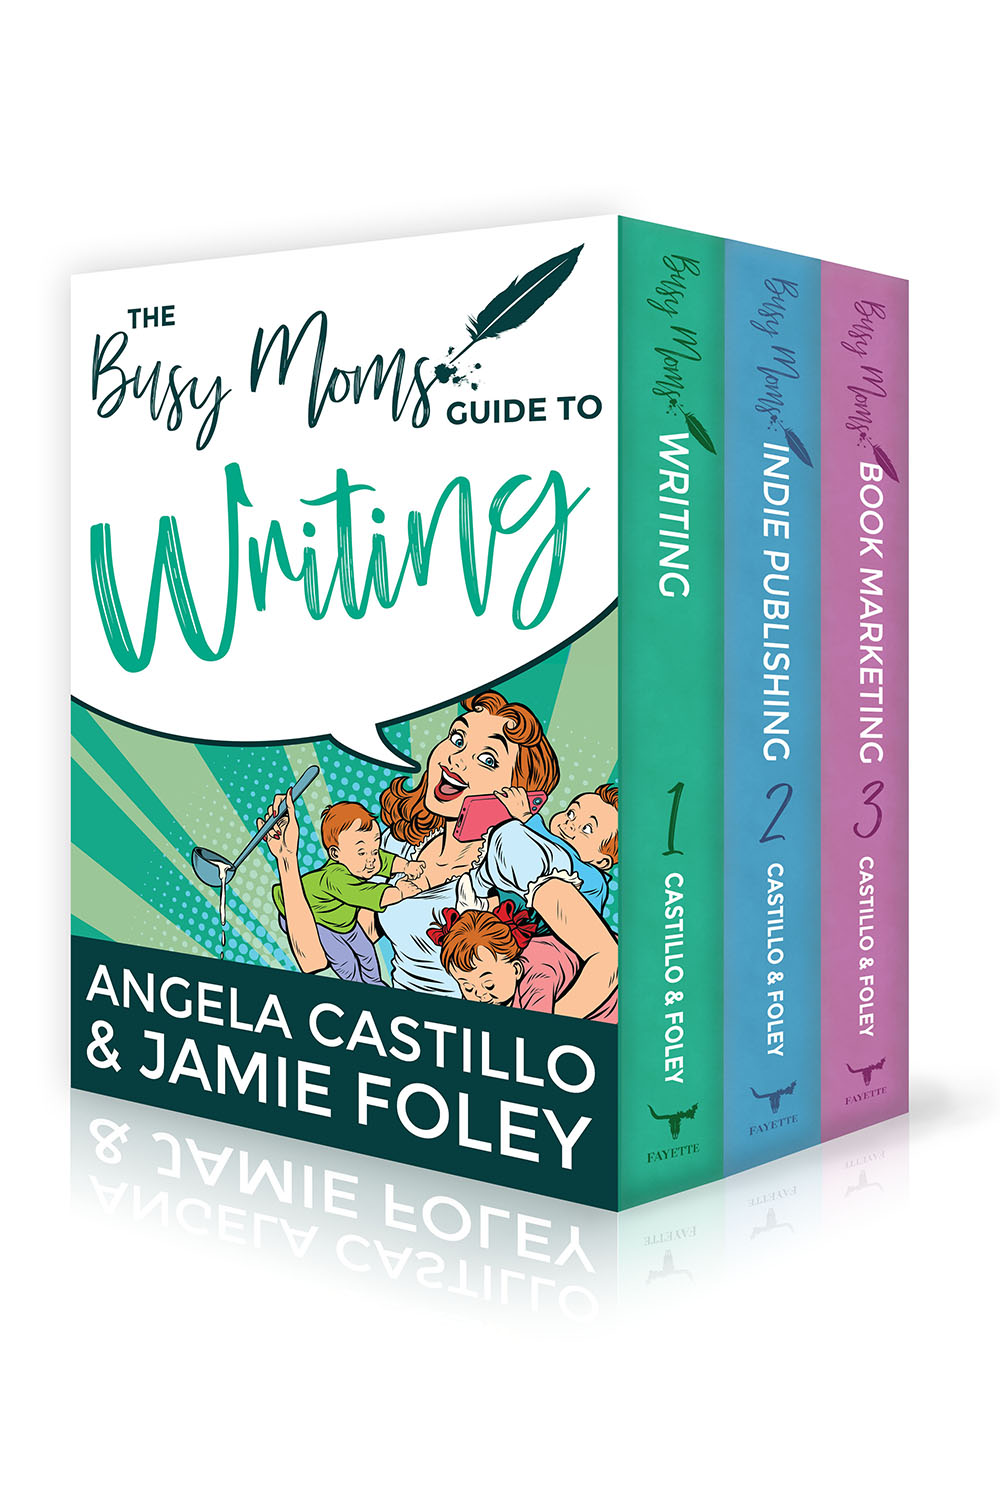 The Busy Mom’s Guide to Writing Box Set